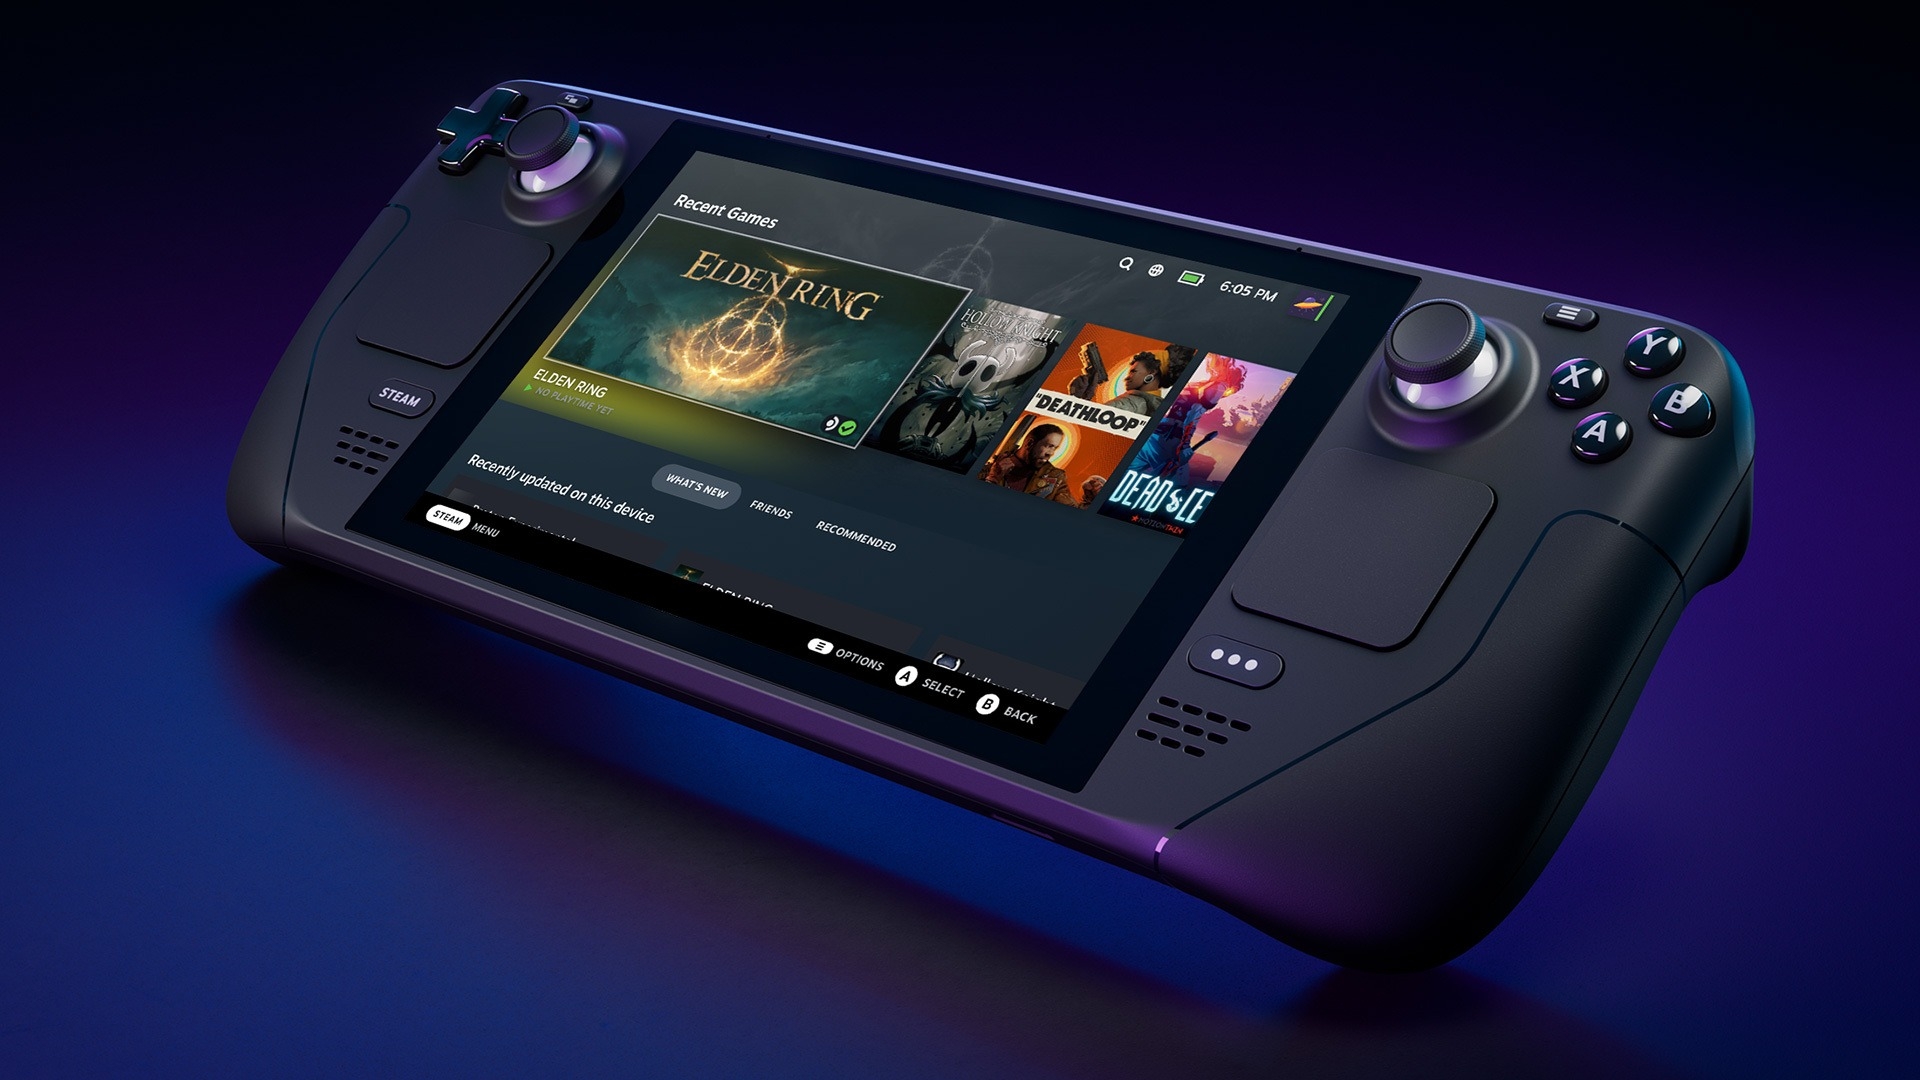 In this guide, we will tell you how to install Windows on Steam Deck, so you can play the games that are not on Steam on this handheld console.